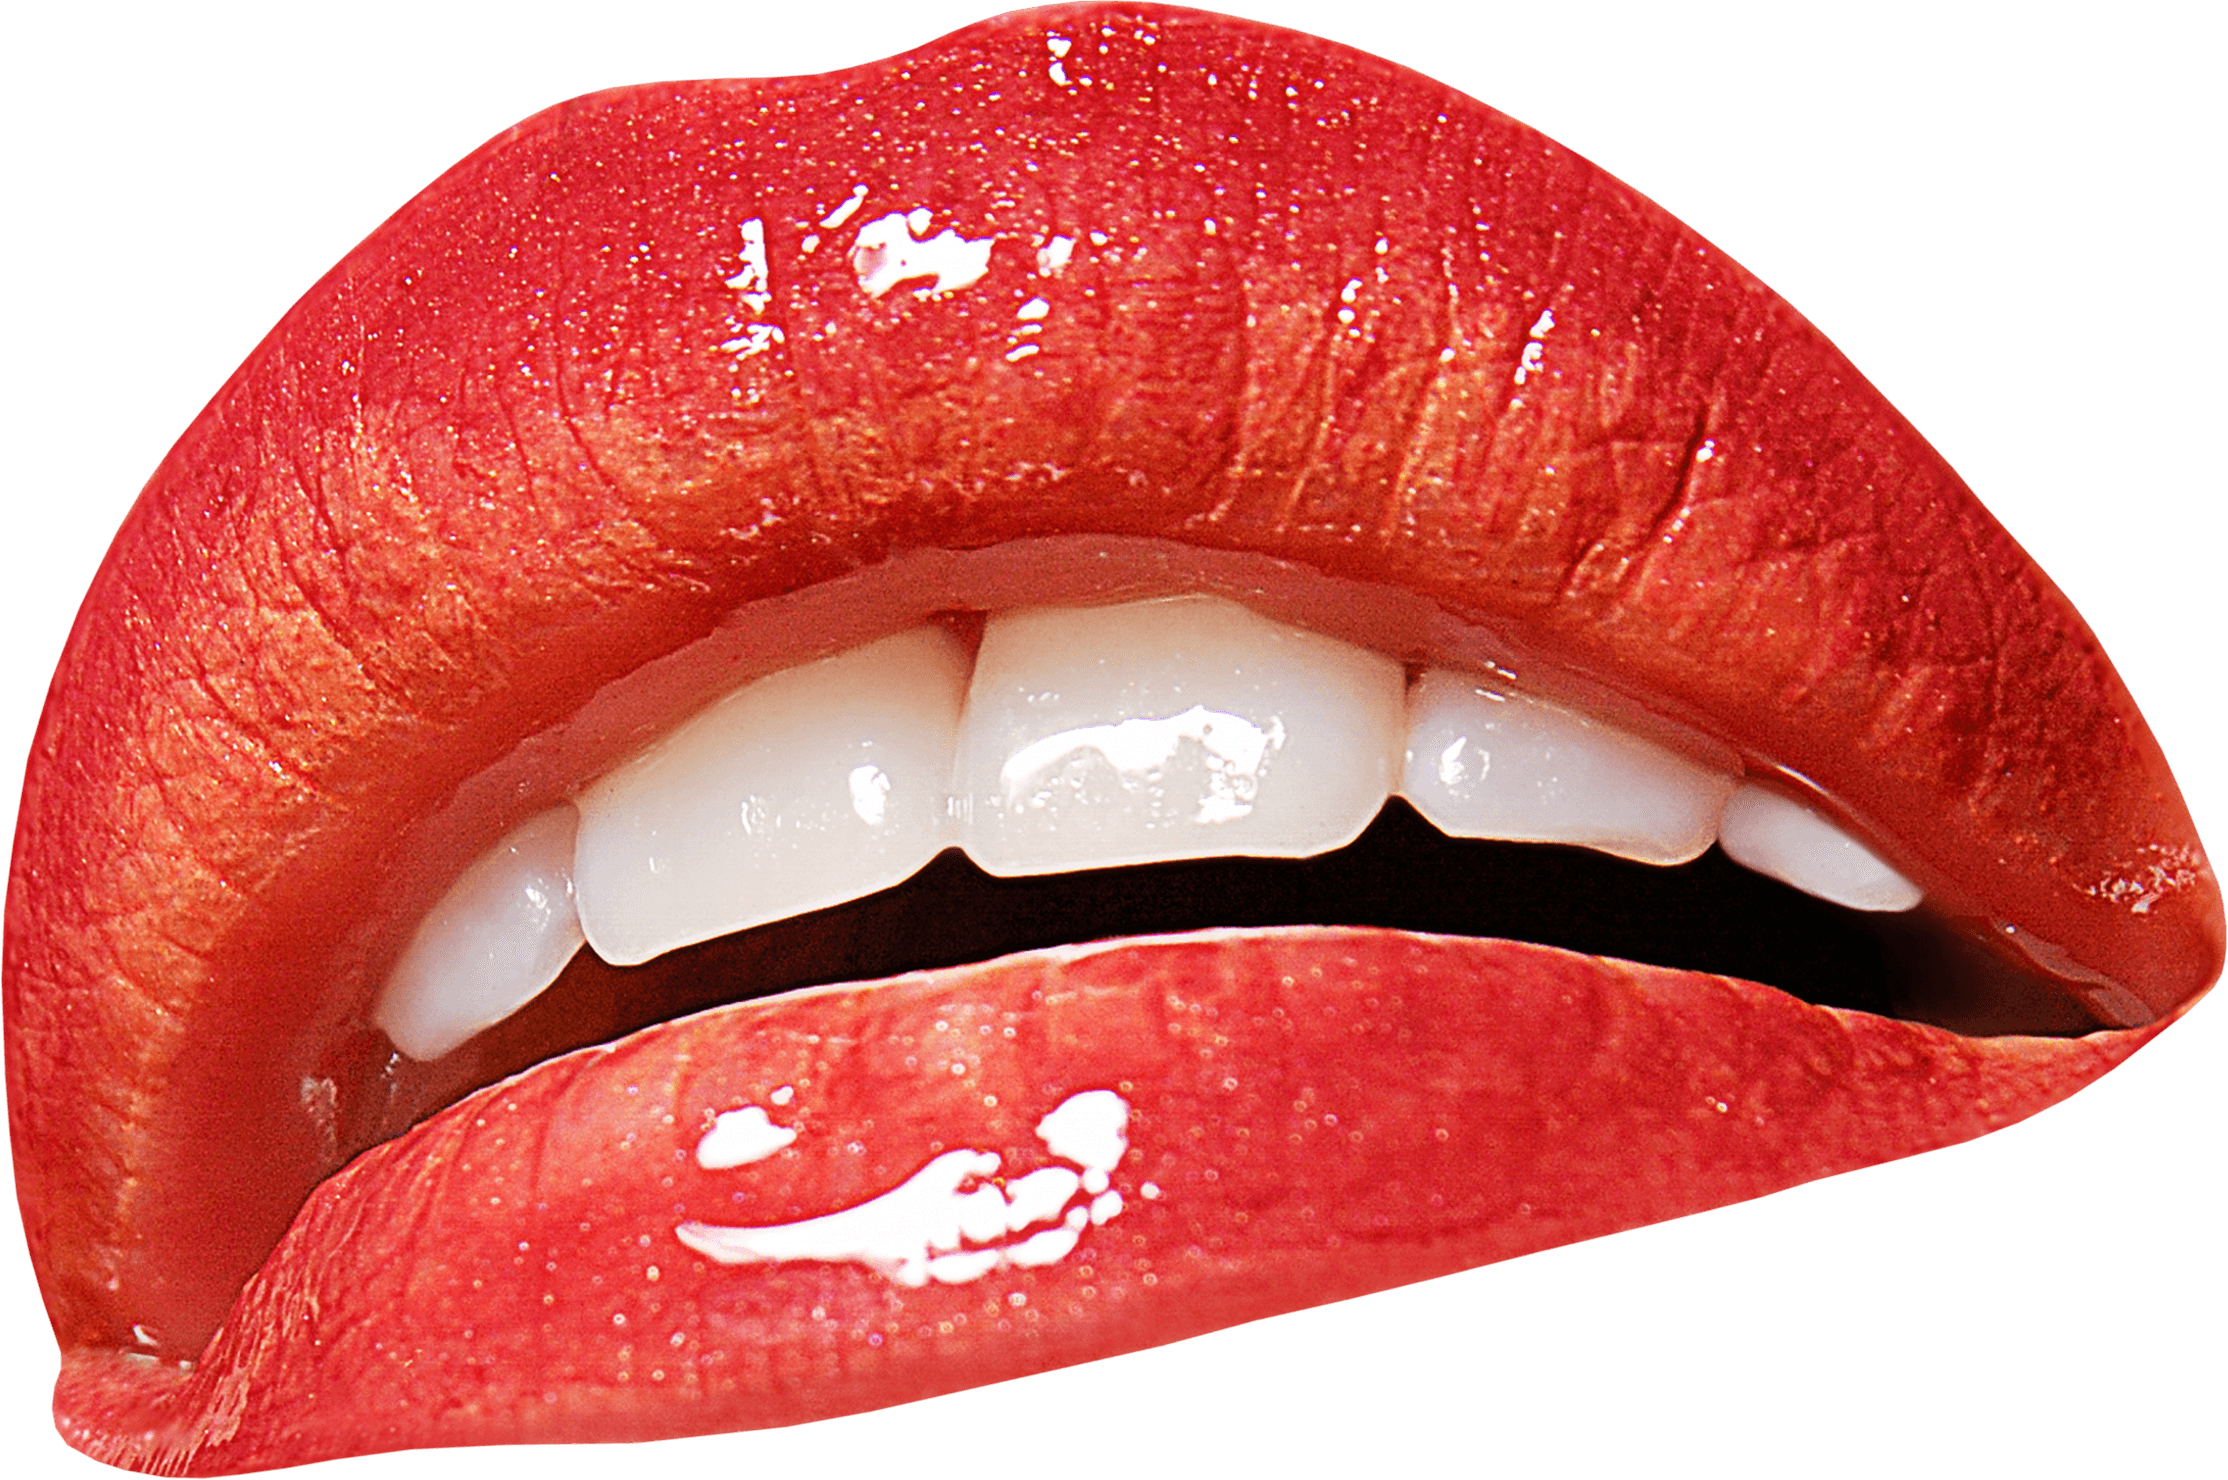 A Close Up Of A Woman's Lips